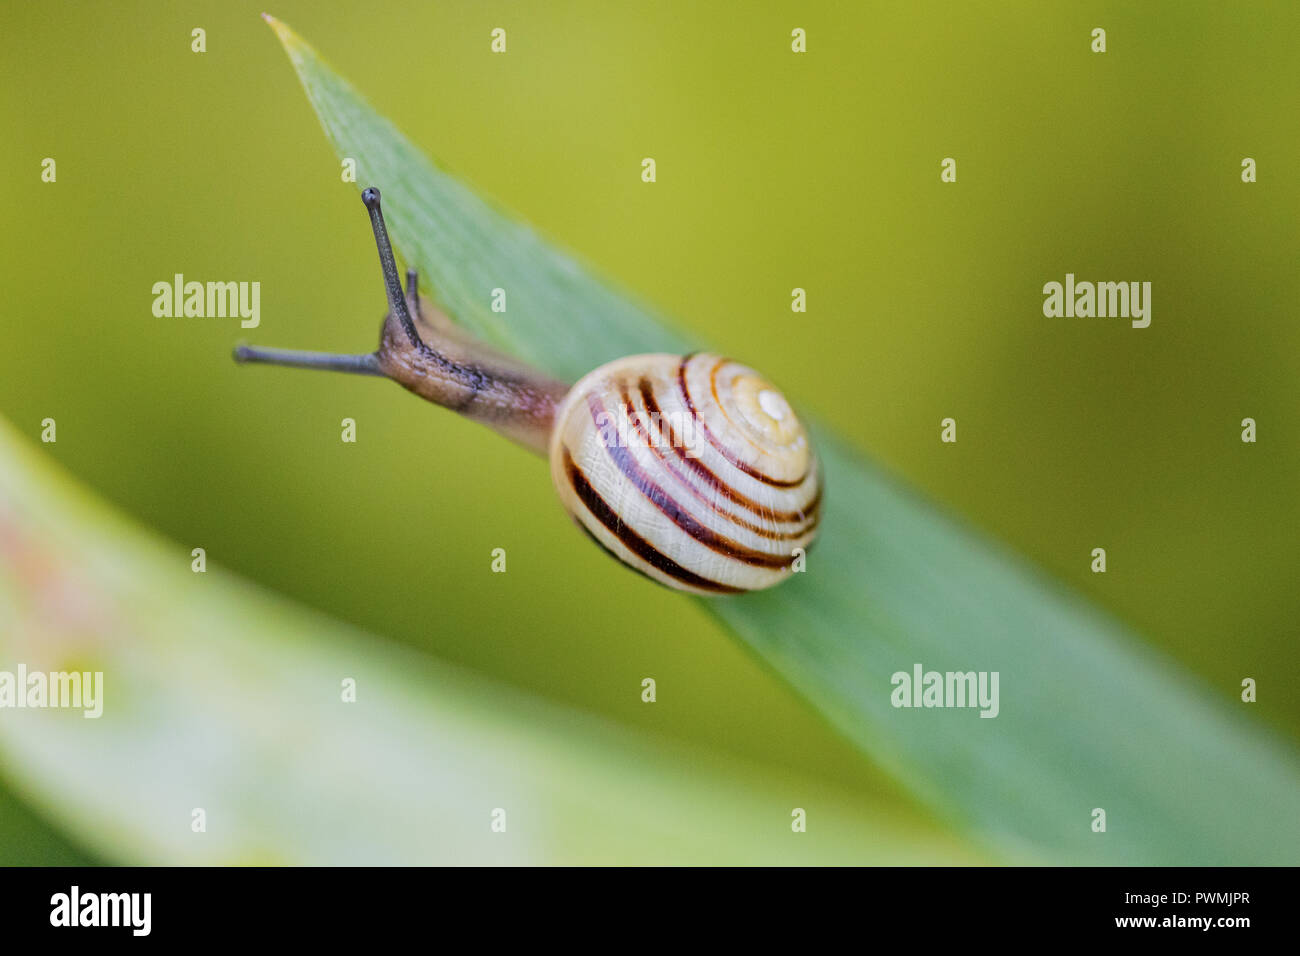 White Lipped Banded Snail on the edge of a green leaf in a garden with blurred background Stock Photo